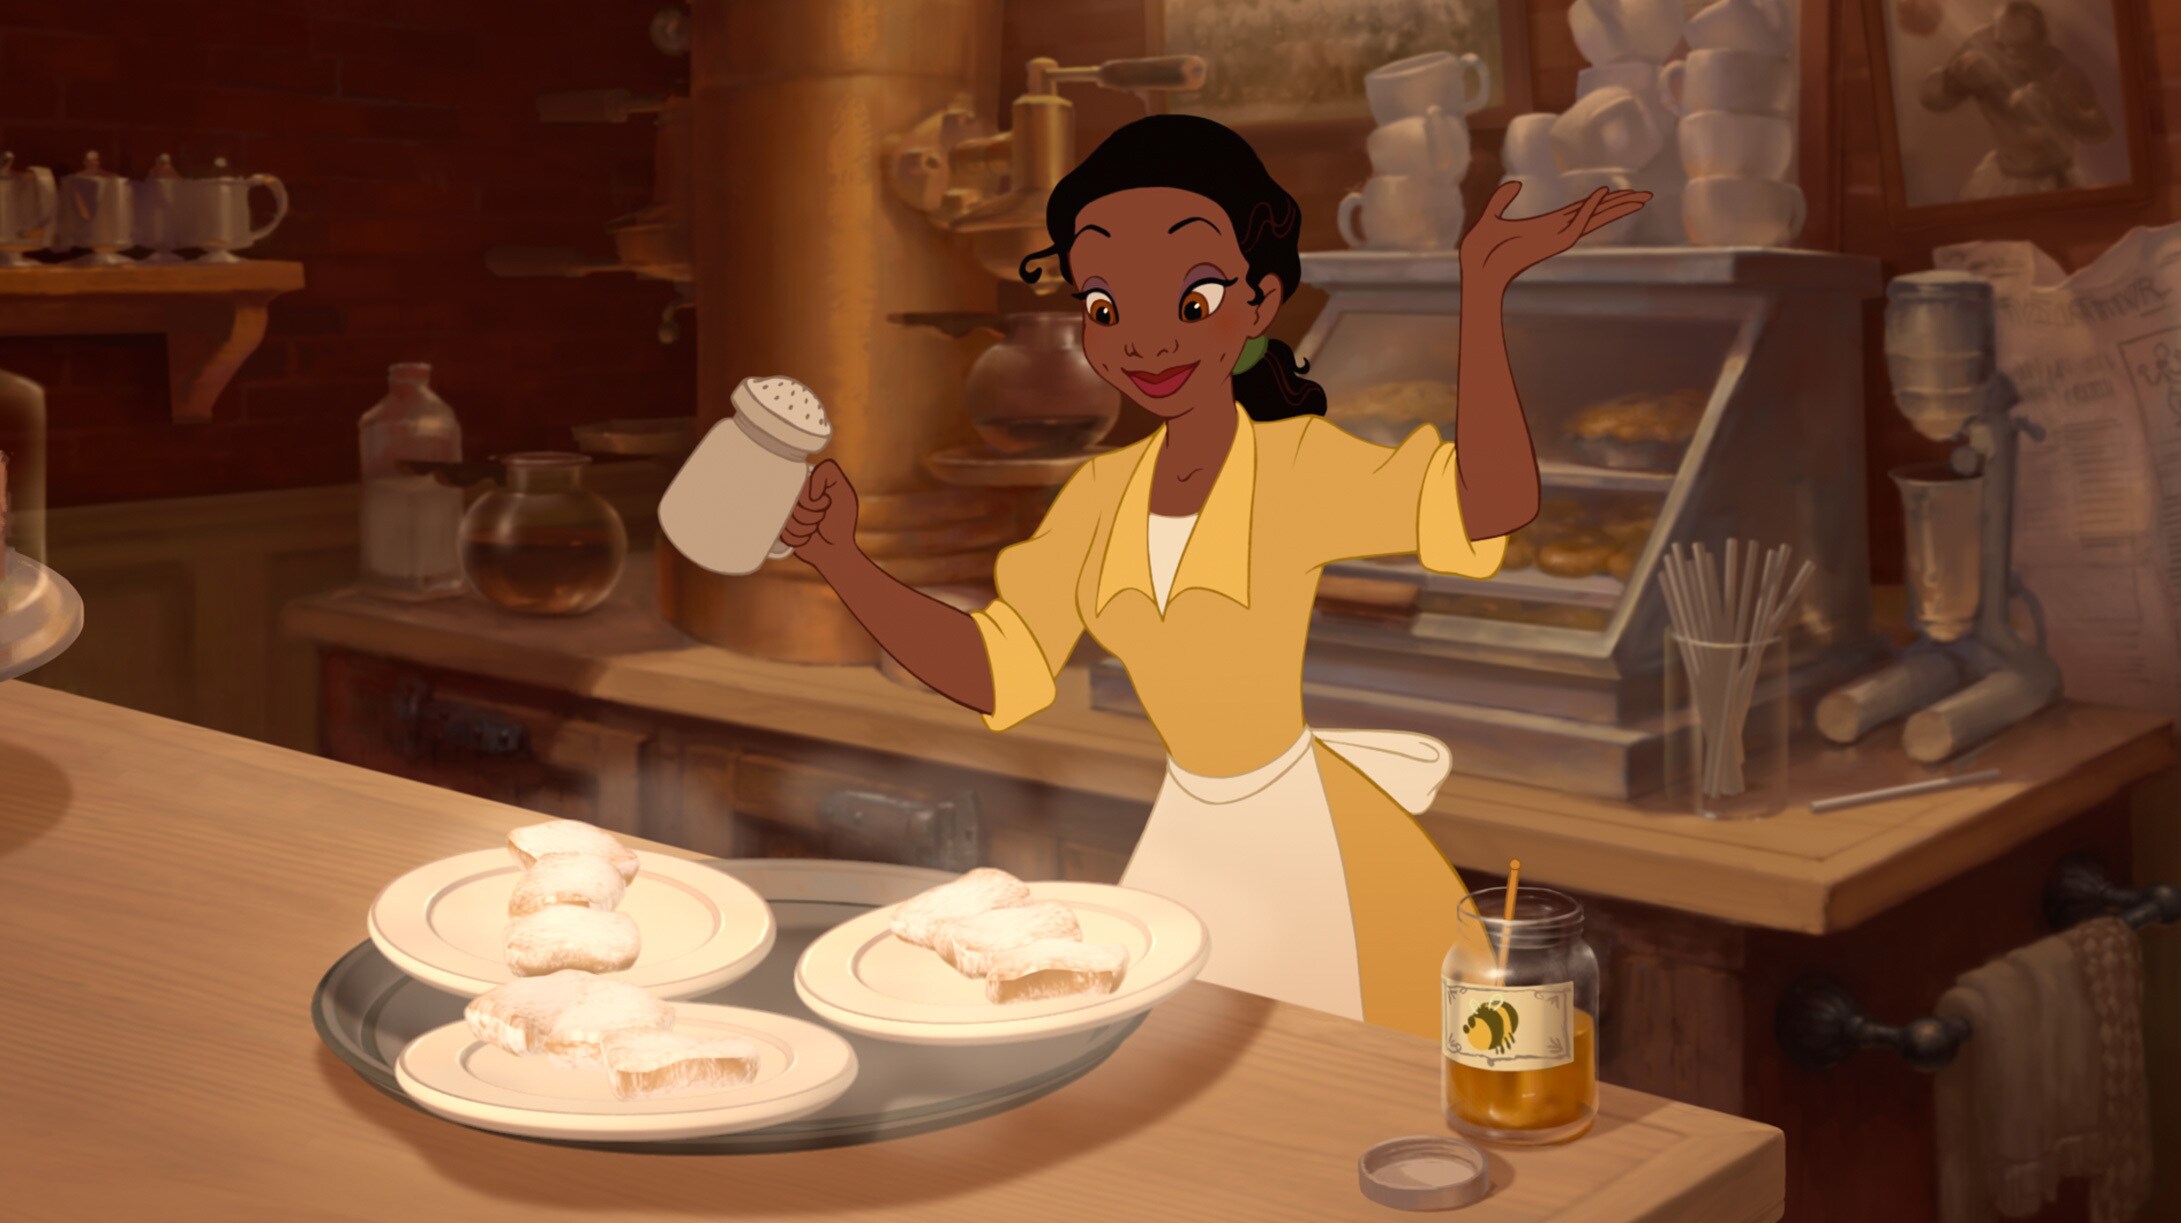 Disney Princess Tiana putting the final touches on her beignets. 